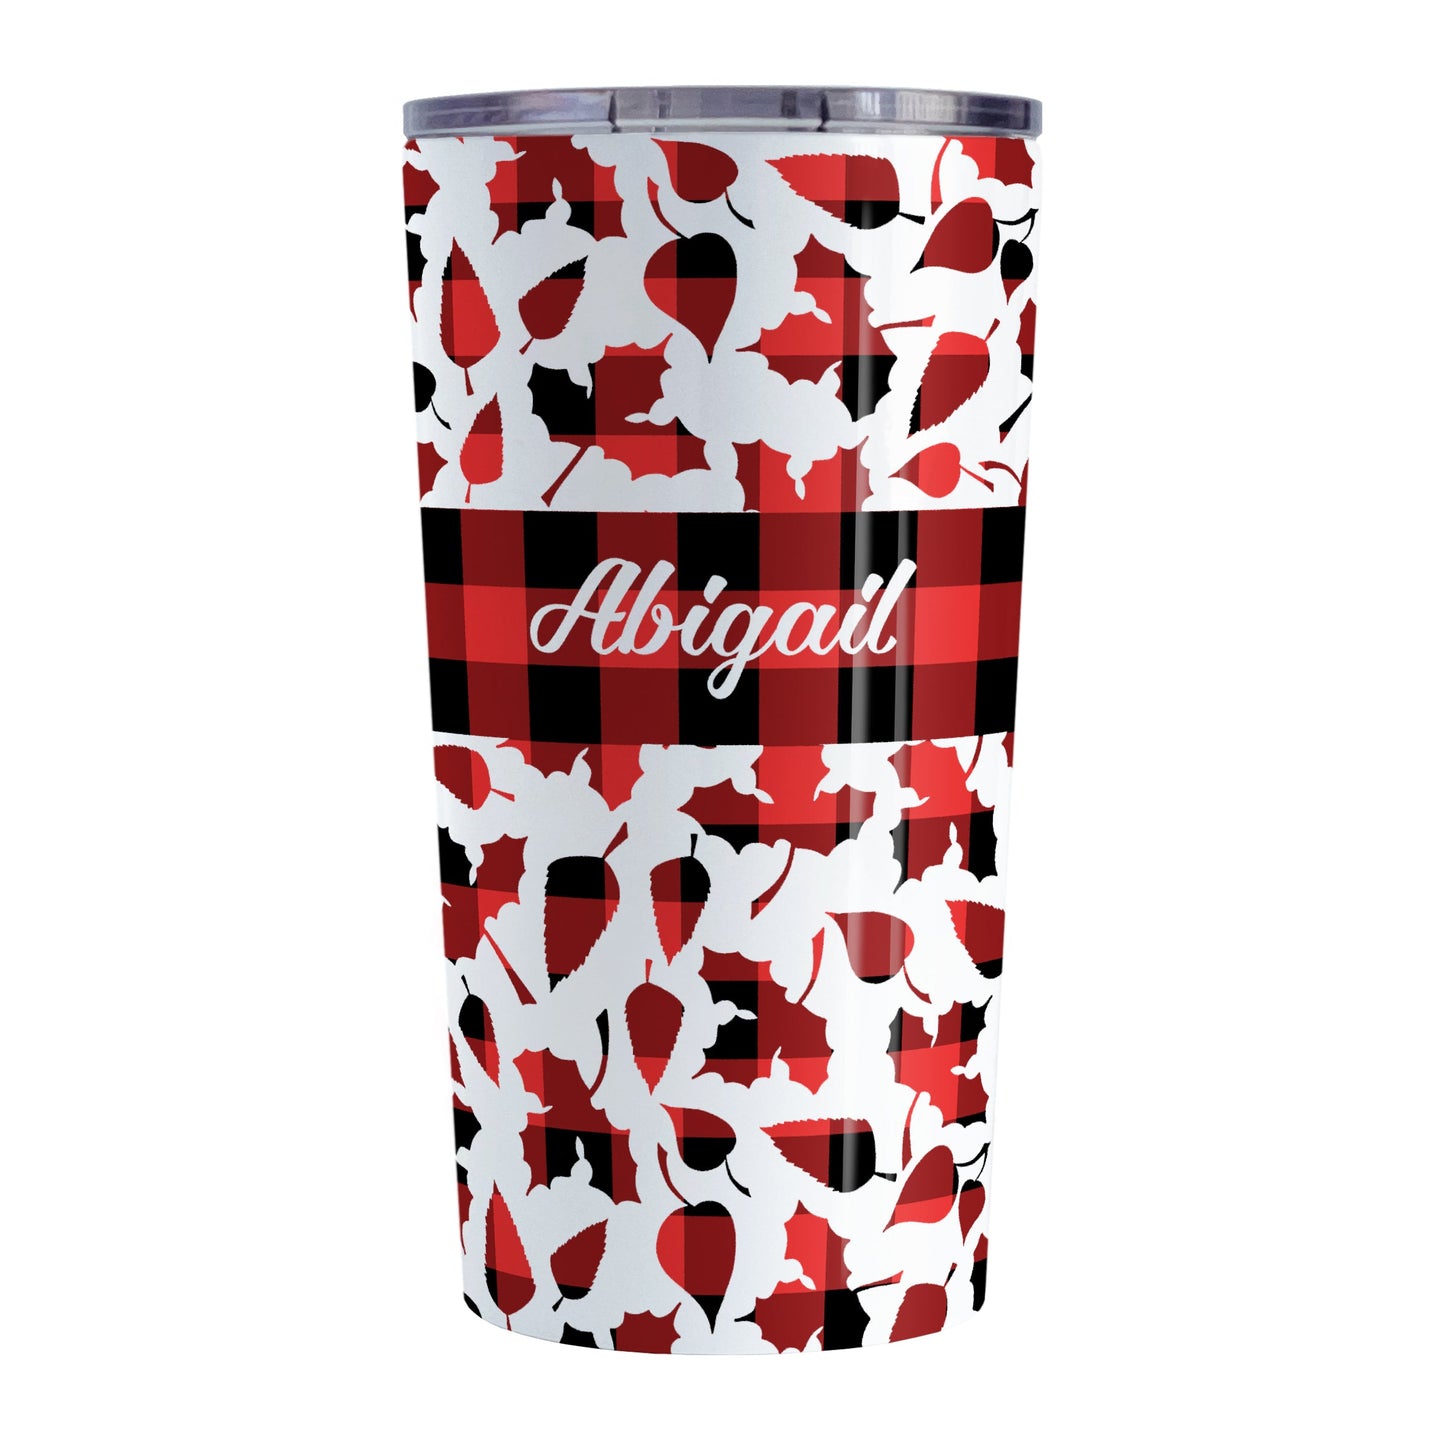 Personalized Buffalo Plaid Leaves Fall Tumbler Cup (20oz) at Amy's Coffee Mugs. A stainless steel insulated tumbler cup designed with a pattern of leaves with a red and black buffalo plaid pattern that wraps around the cup. There is a buffalo plaid stripe over middle area of the leaves with your name custom printed in a white script font.